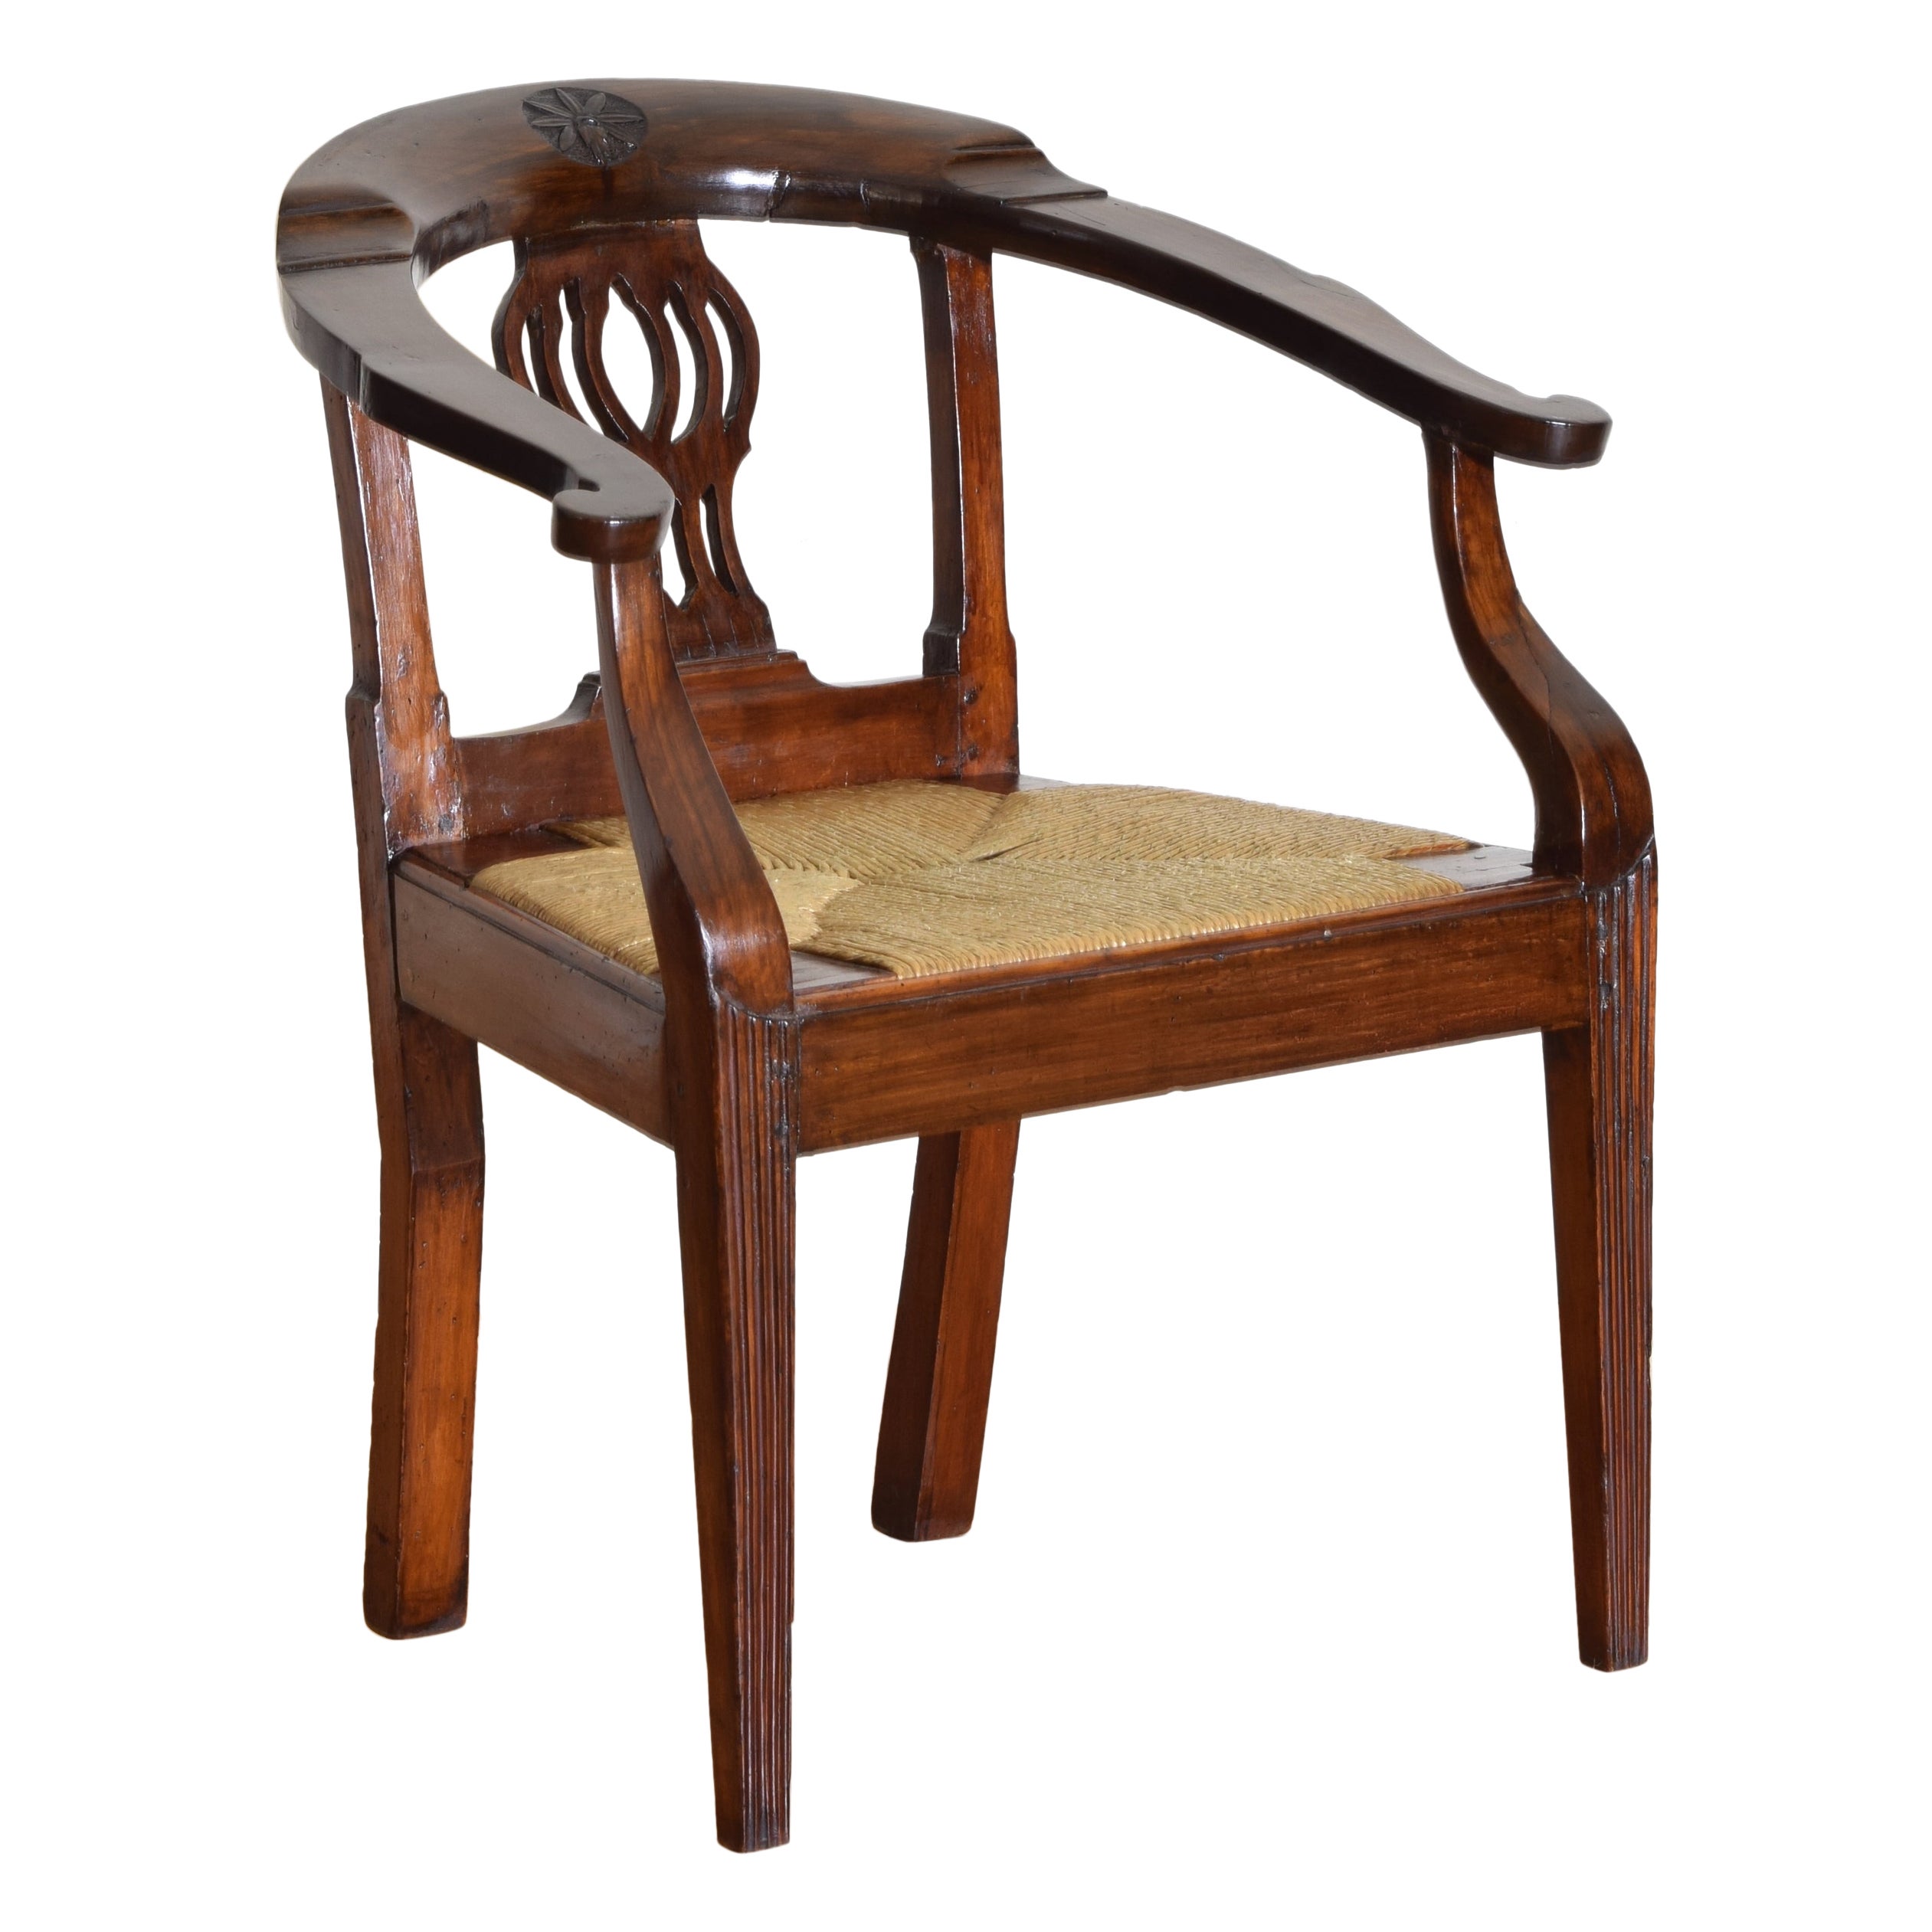 Italian, Toscana, Shaped & Carved Walnut Open Armchair, Rush Seat, late 18th cen For Sale